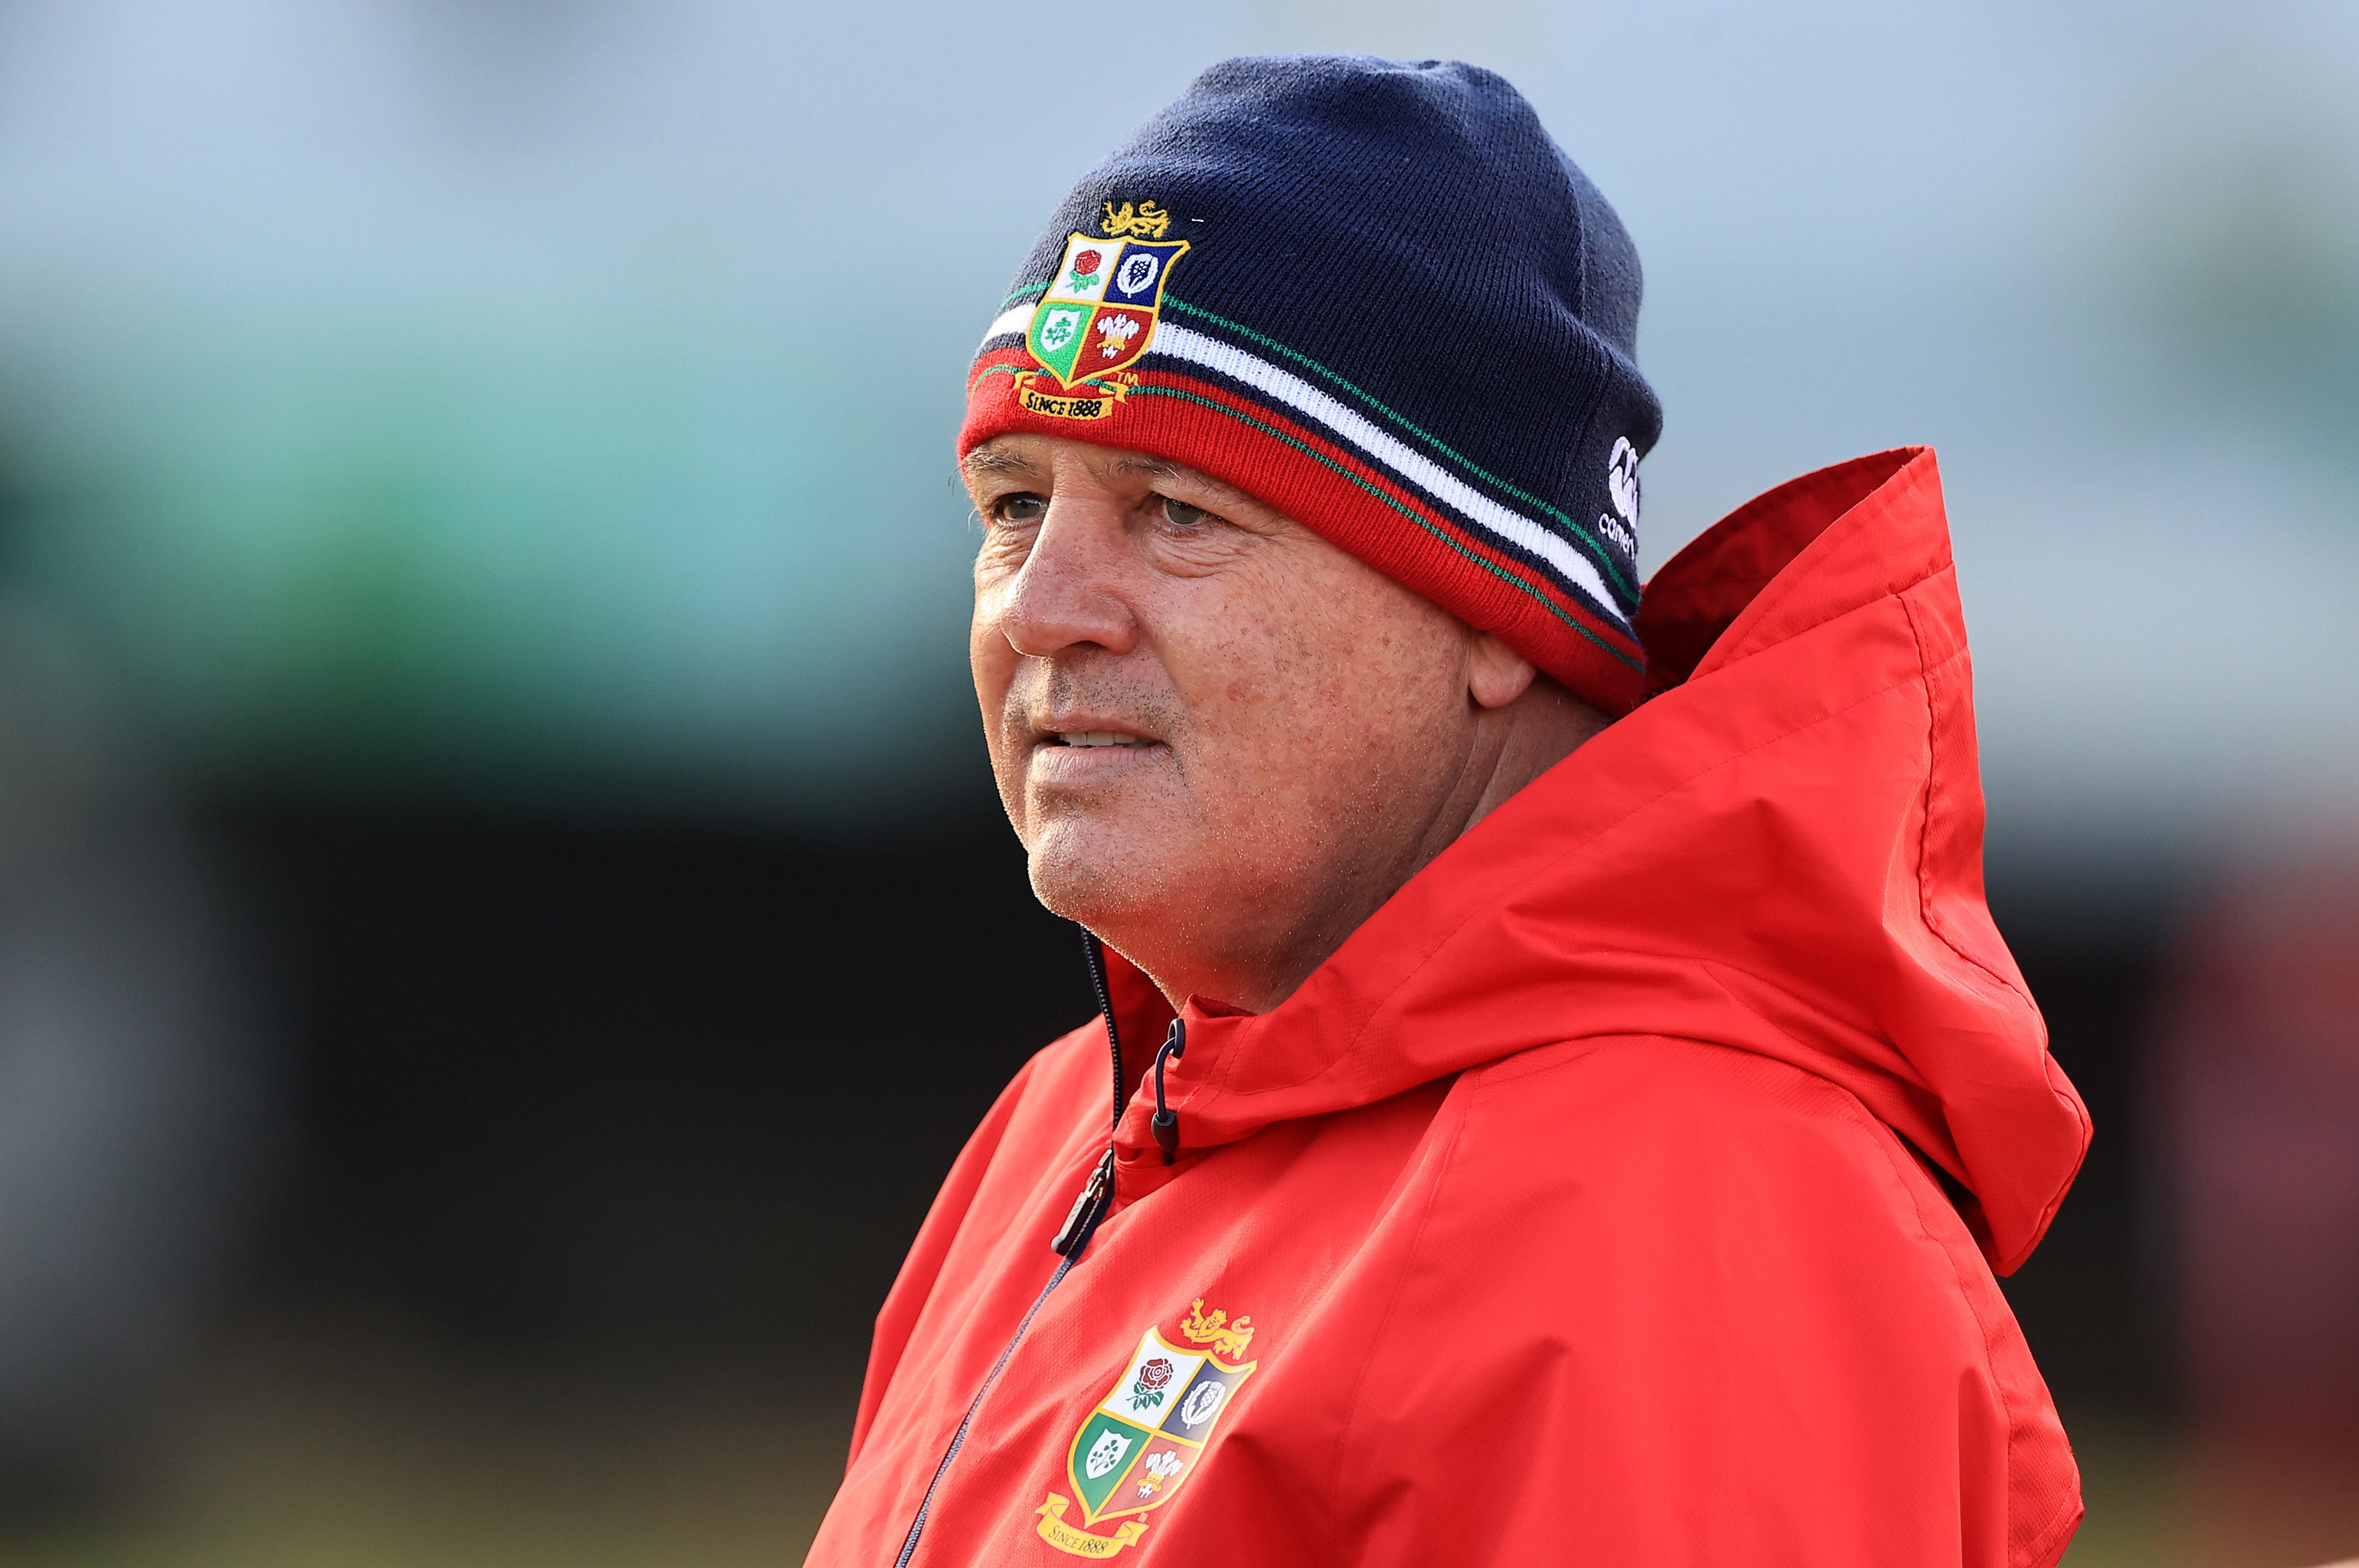 Warren Gatland will make changes for the final Test (PA)